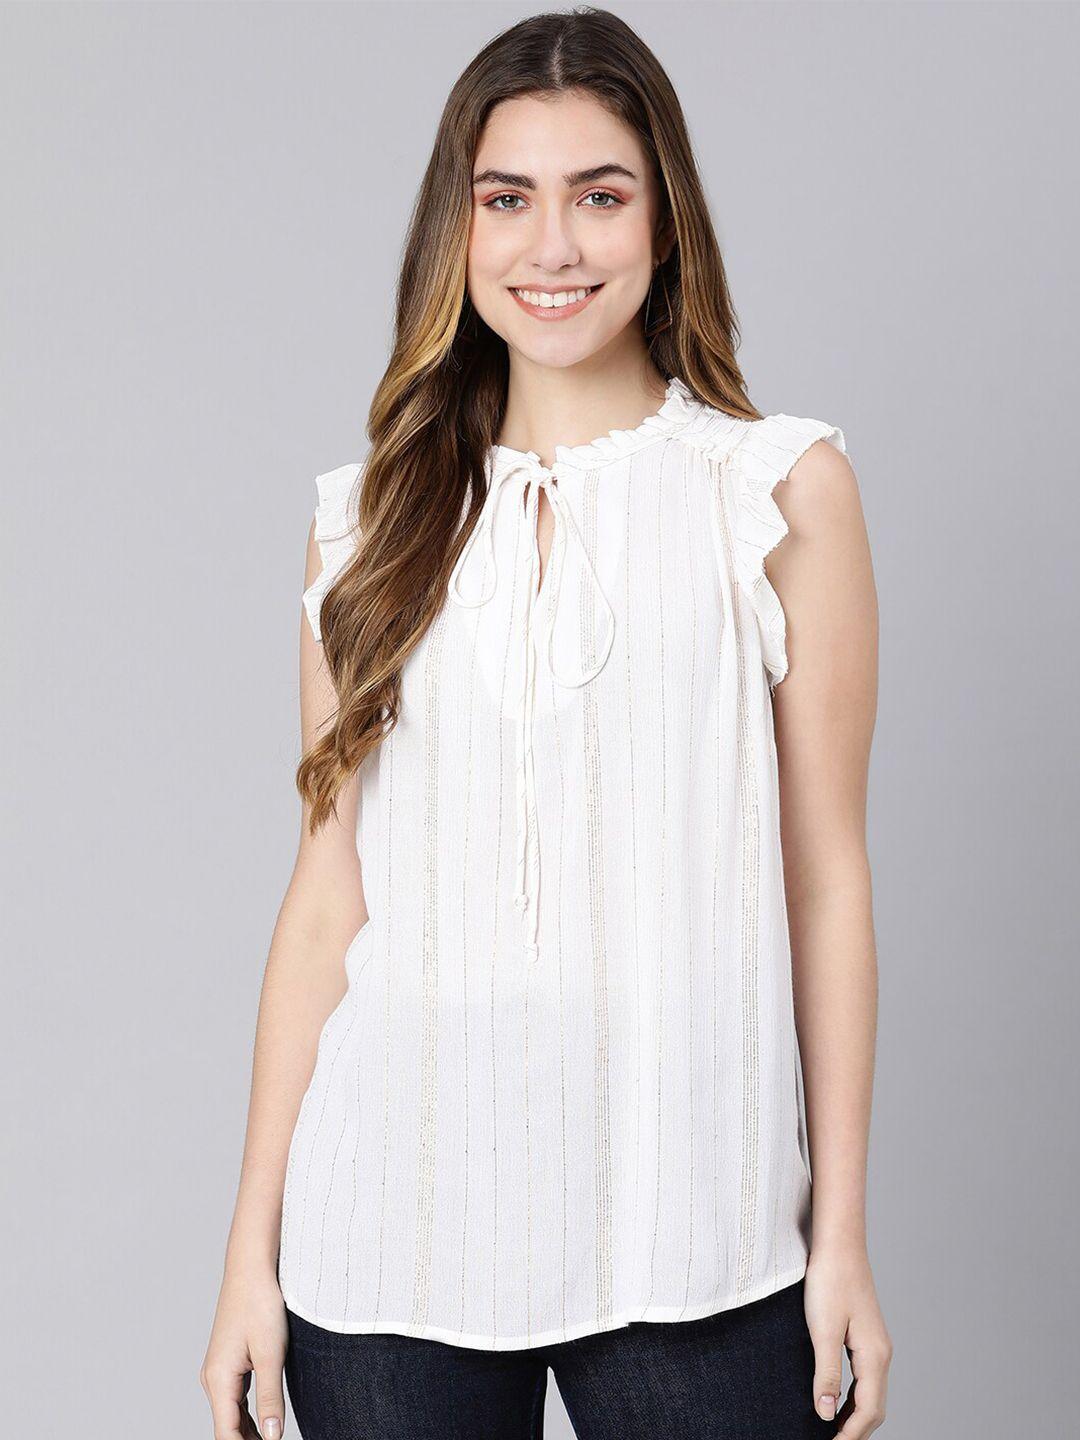 oxolloxo-women-white-striped-tie-up-neck-ruffles-crepe-top